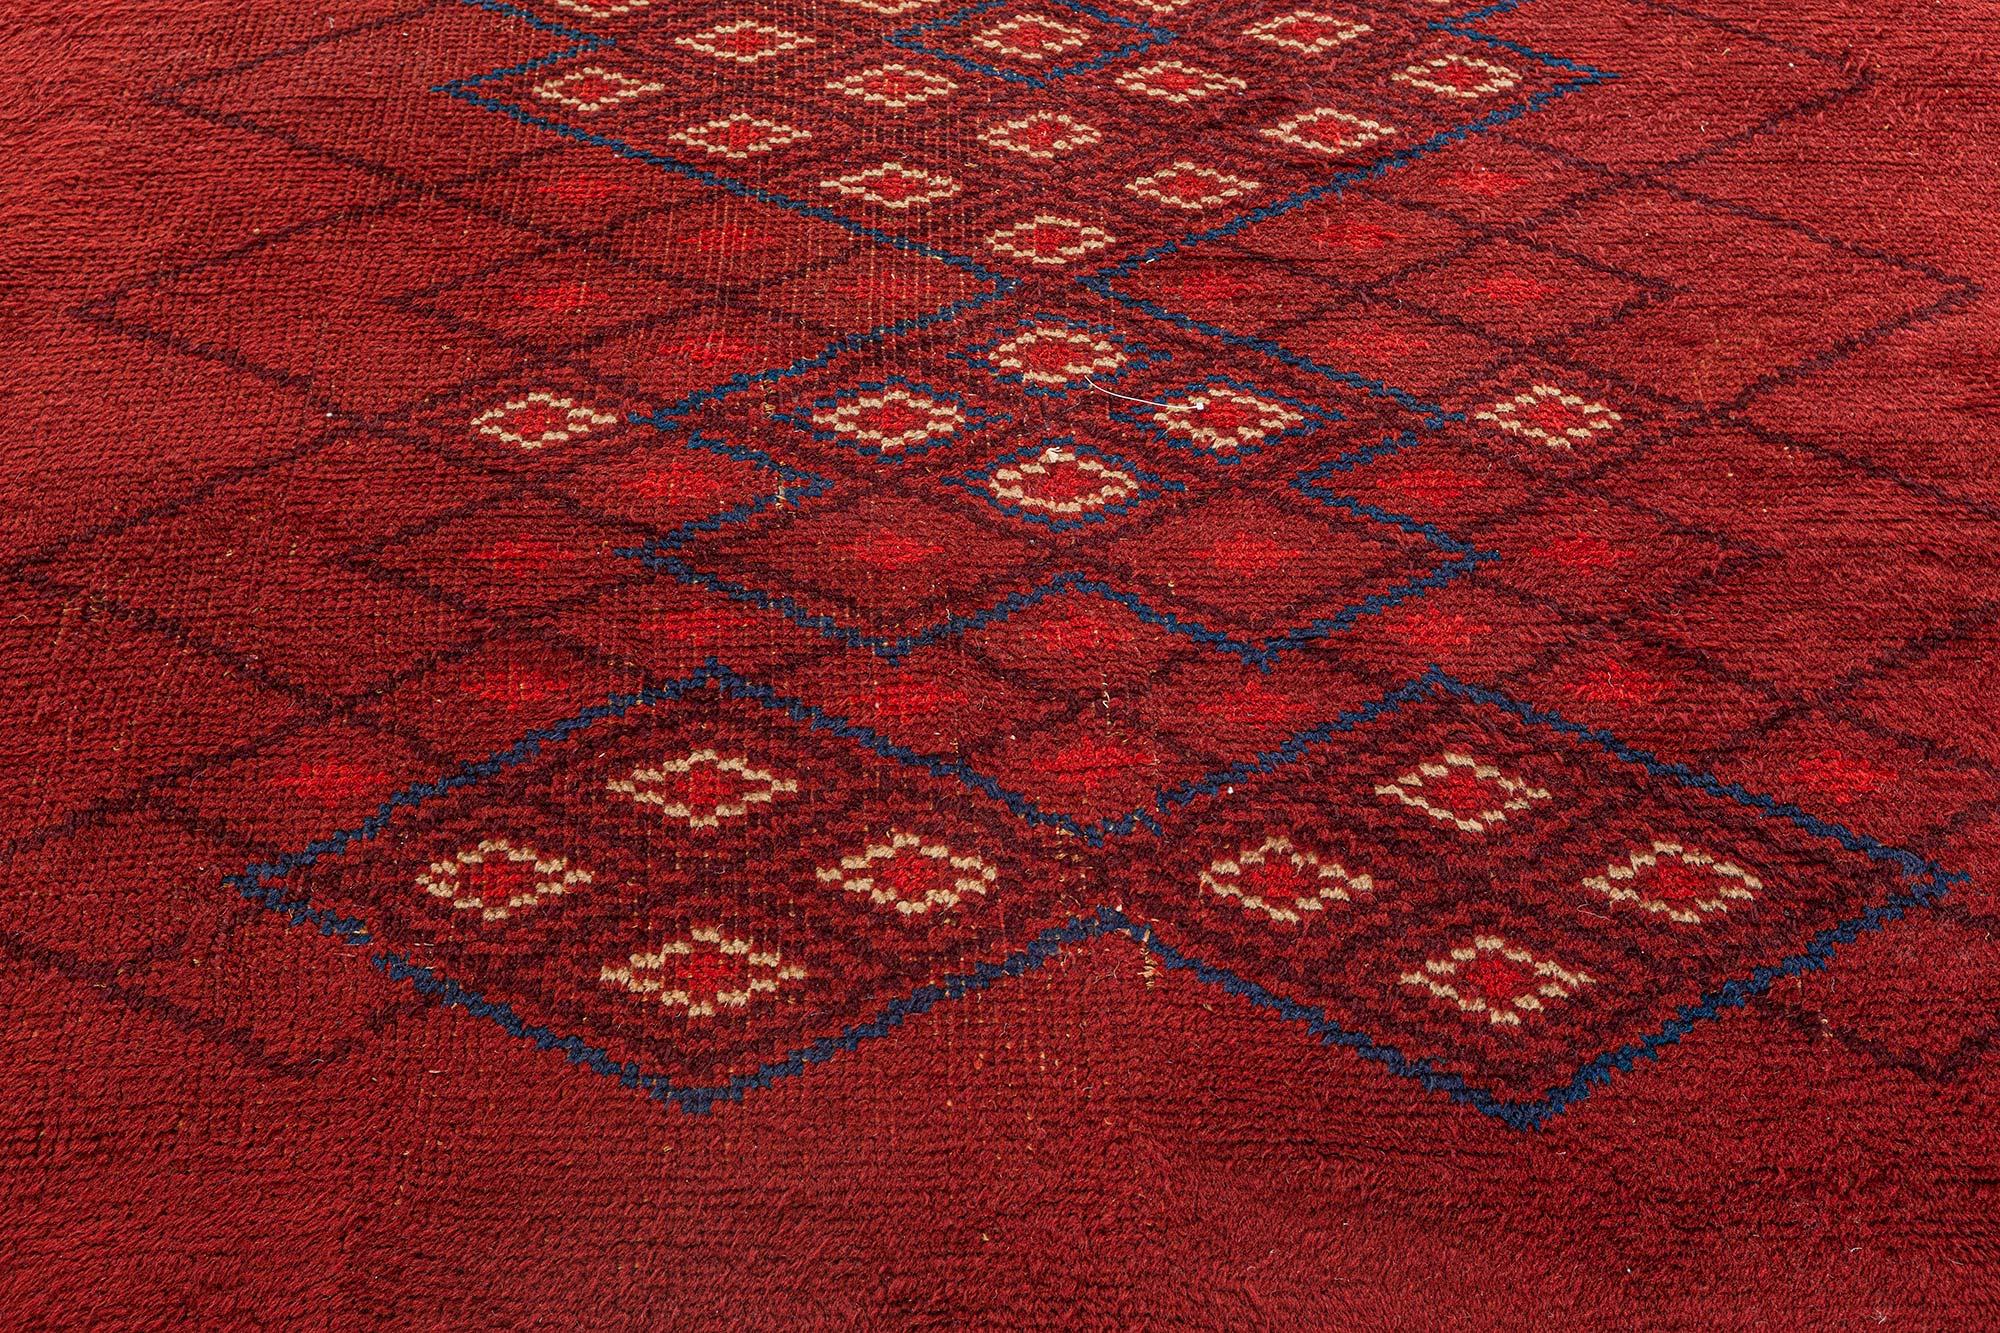 French Art Deco red rug by Paule Leleu
Size: 5'8